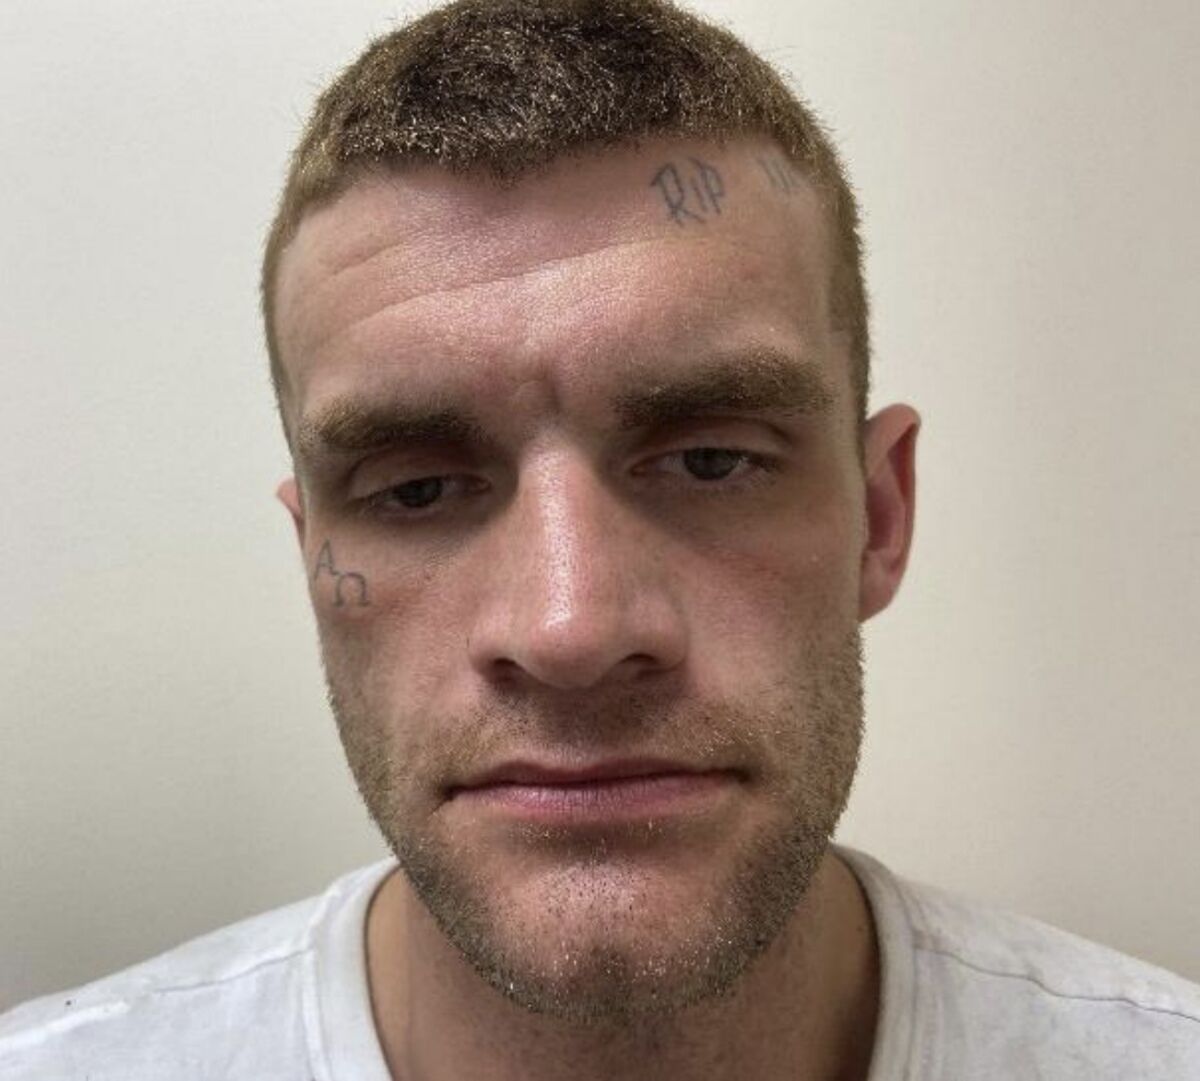 This undated photo released by the Santa Cruz, Calif., Police Department shows Beau Joseph Paepke, who was arrested on suspicion of murder after he went to the Santa Cruz County jail and told officials he had killed a woman days earlier, police said. Paepke, 30, turned himself in Thursday, July 1, 2021, to officials at the jail and told police investigators where they could find the body, the Santa Cruz Police Department said in a statement Friday, July 2, 2021. Police officers responded to an RV parked on a Santa Cruz street and found the body of a 33-year-old woman. (Santa Cruz Police Department via AP)